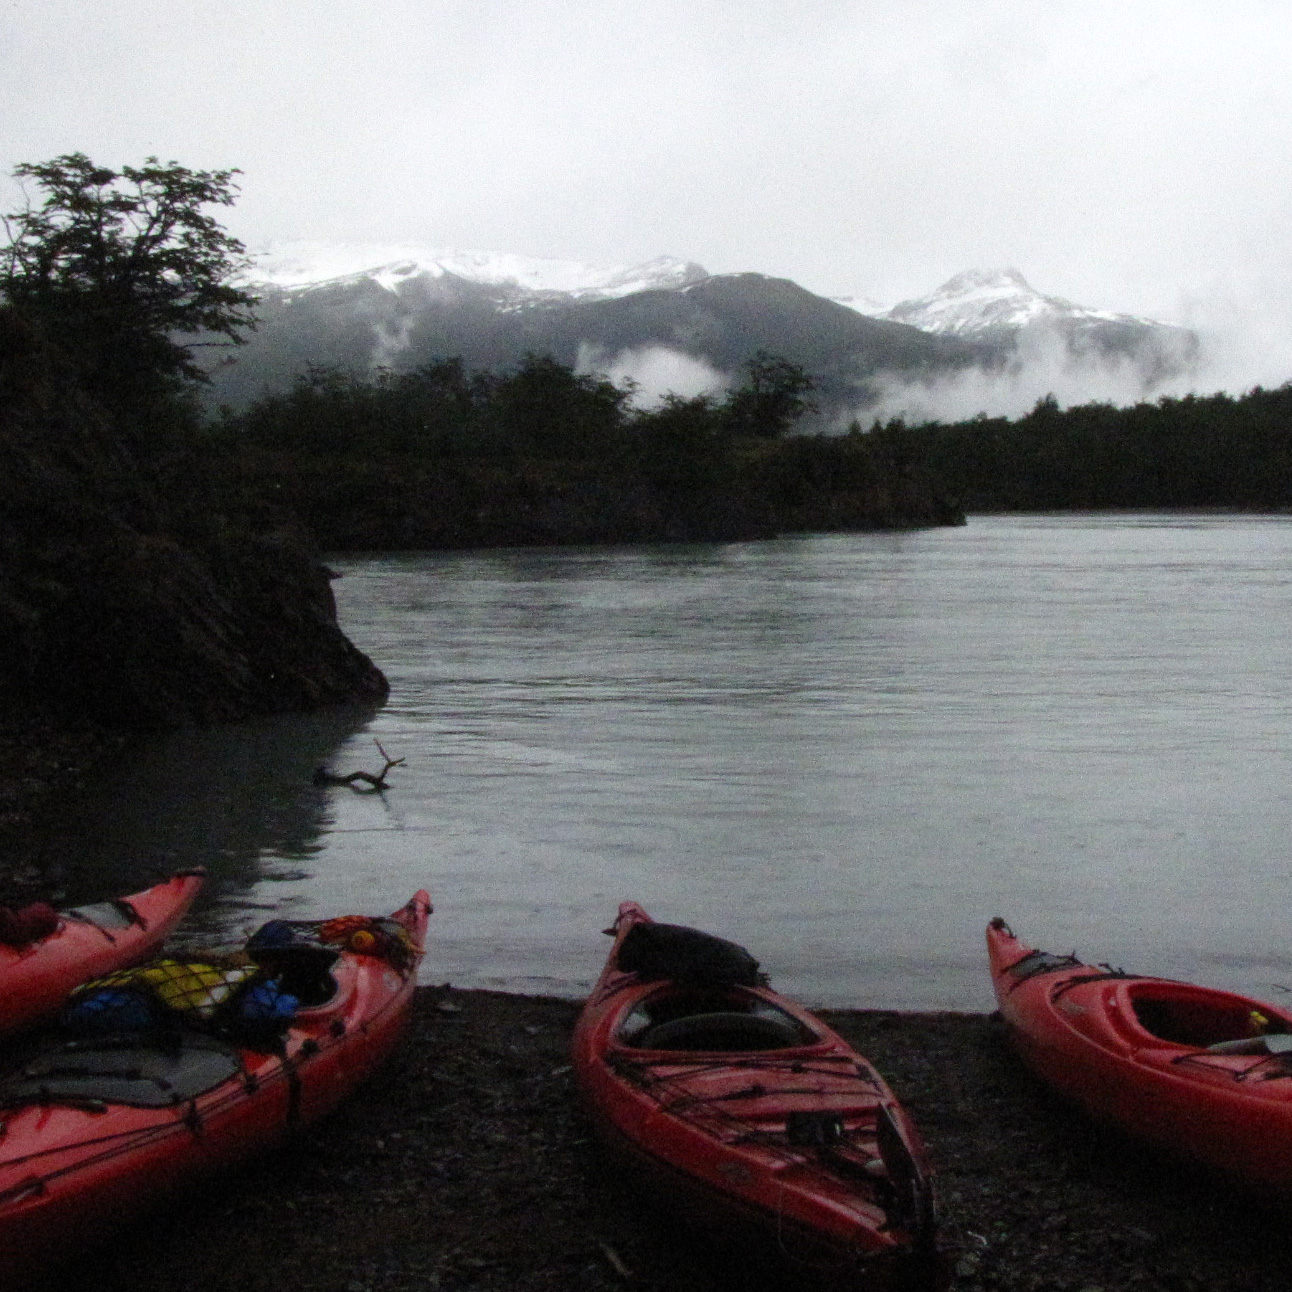 Patagonia By Kayak – A Photo Essay